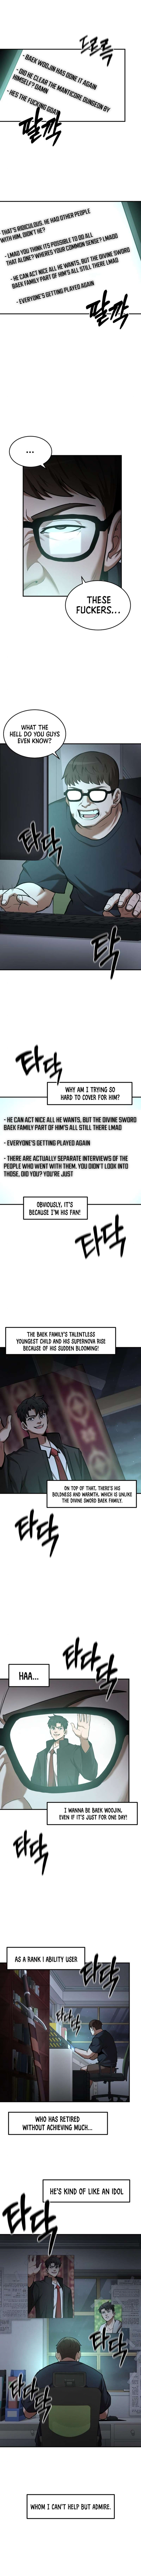 I Became A Renowned Family’S Sword Prodigy - chapter 93 - #2